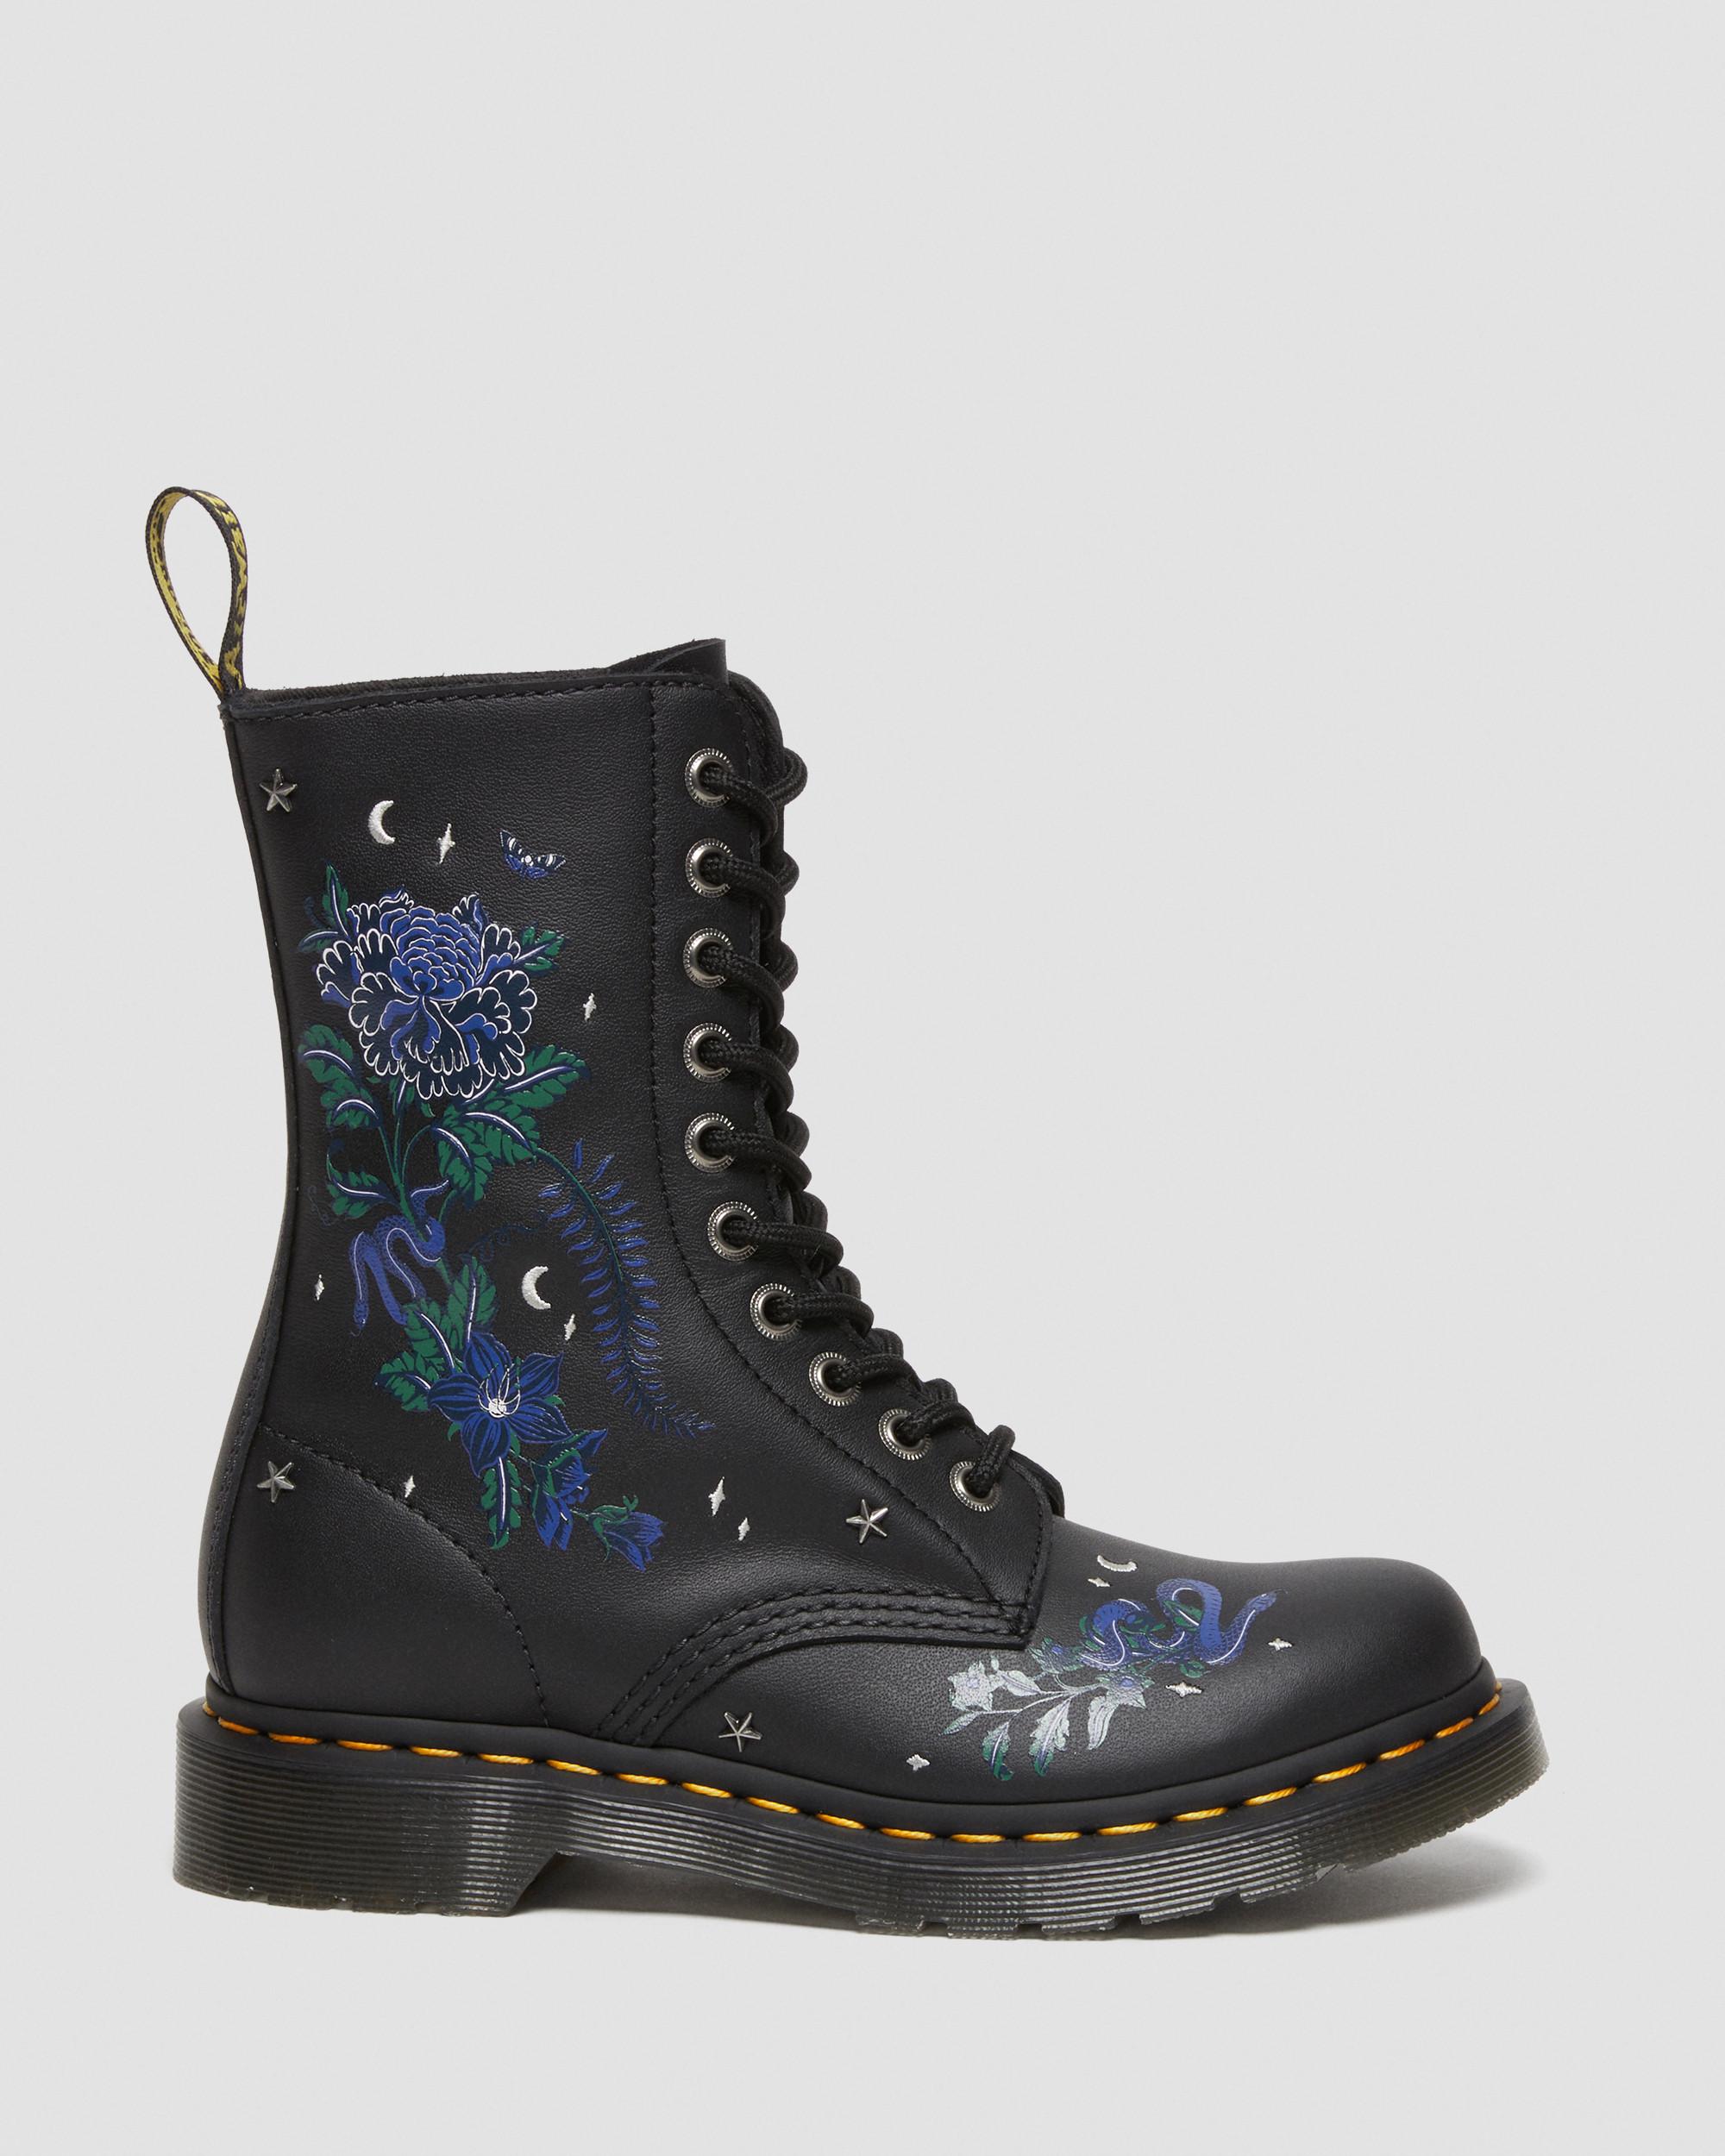 1490 Mystic Floral Leather Mid-Calf Boots | Dr. Martens